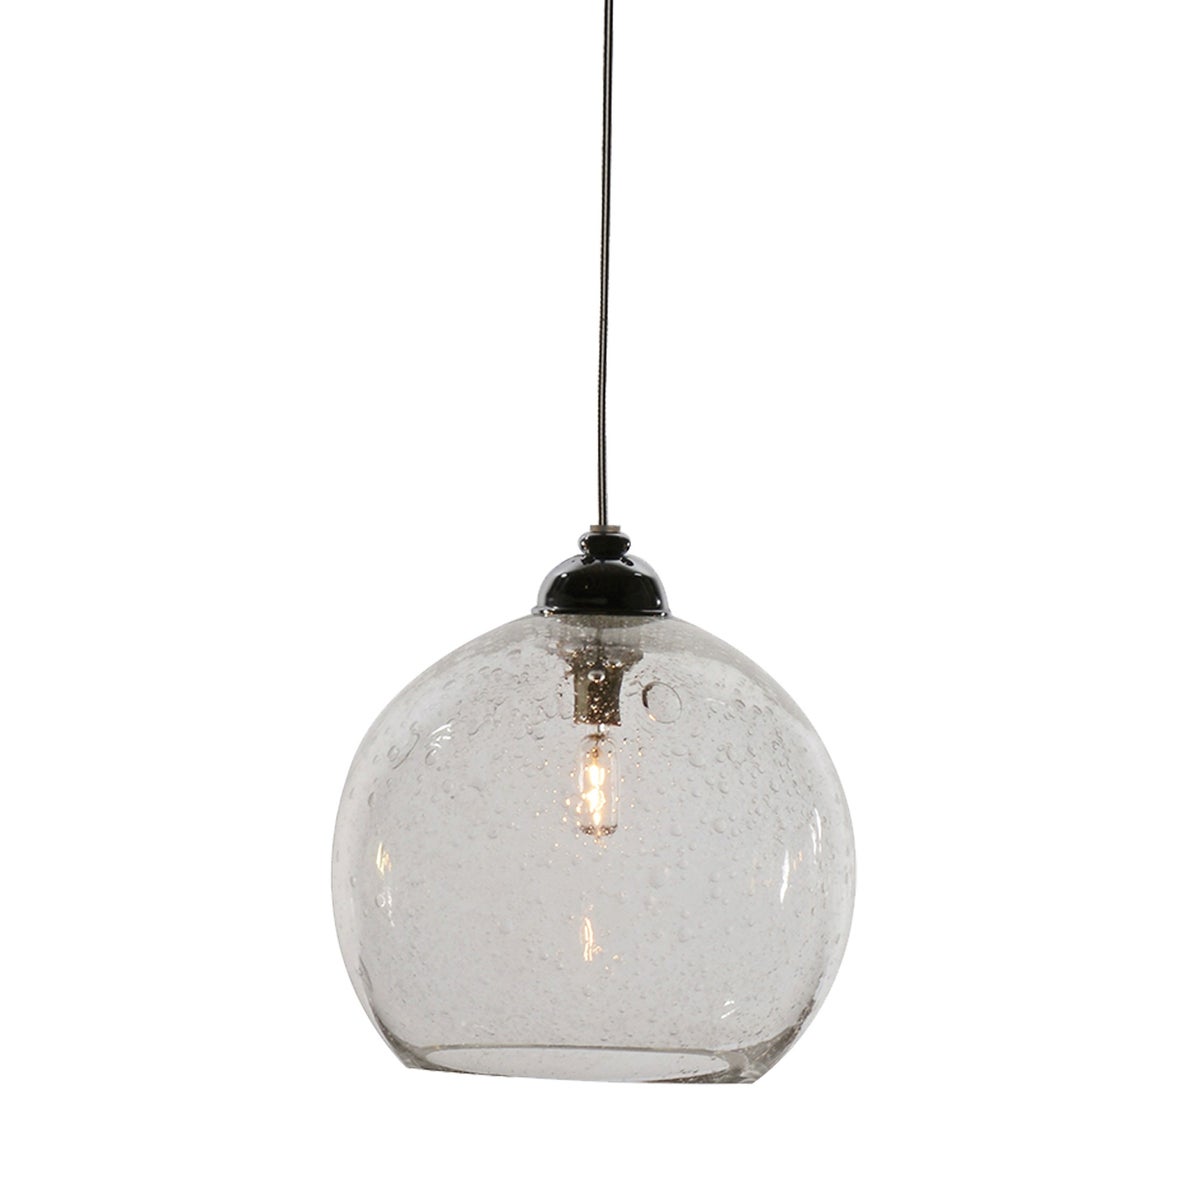 Systo Tramonto 01 Single Chandelier Round